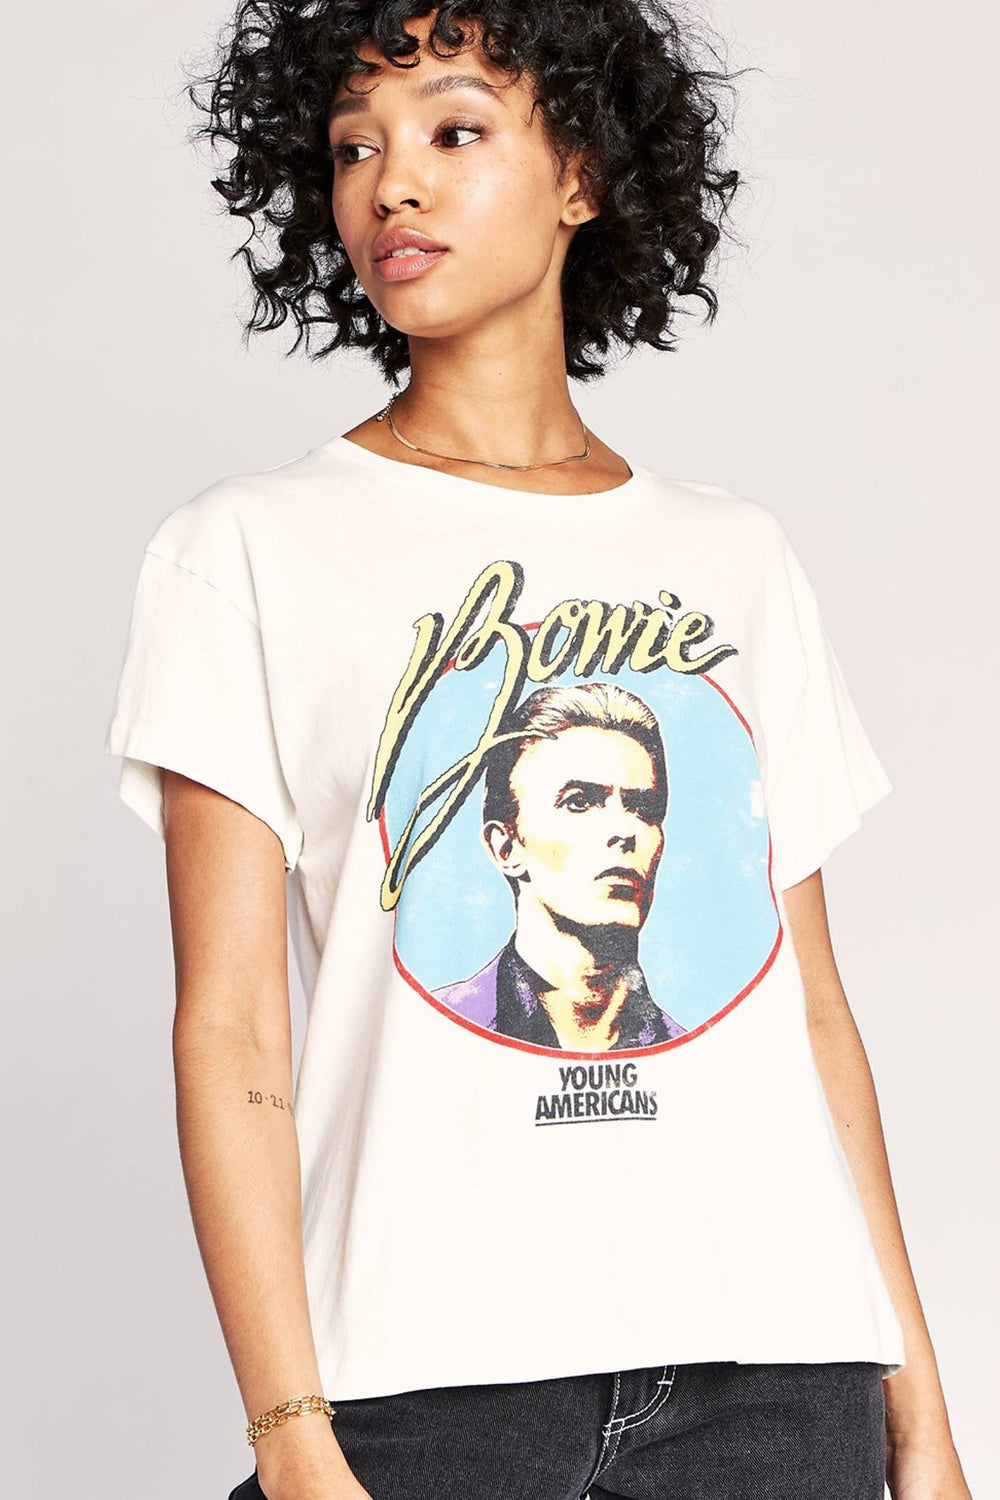 Bowie Young Americans Tour Tee